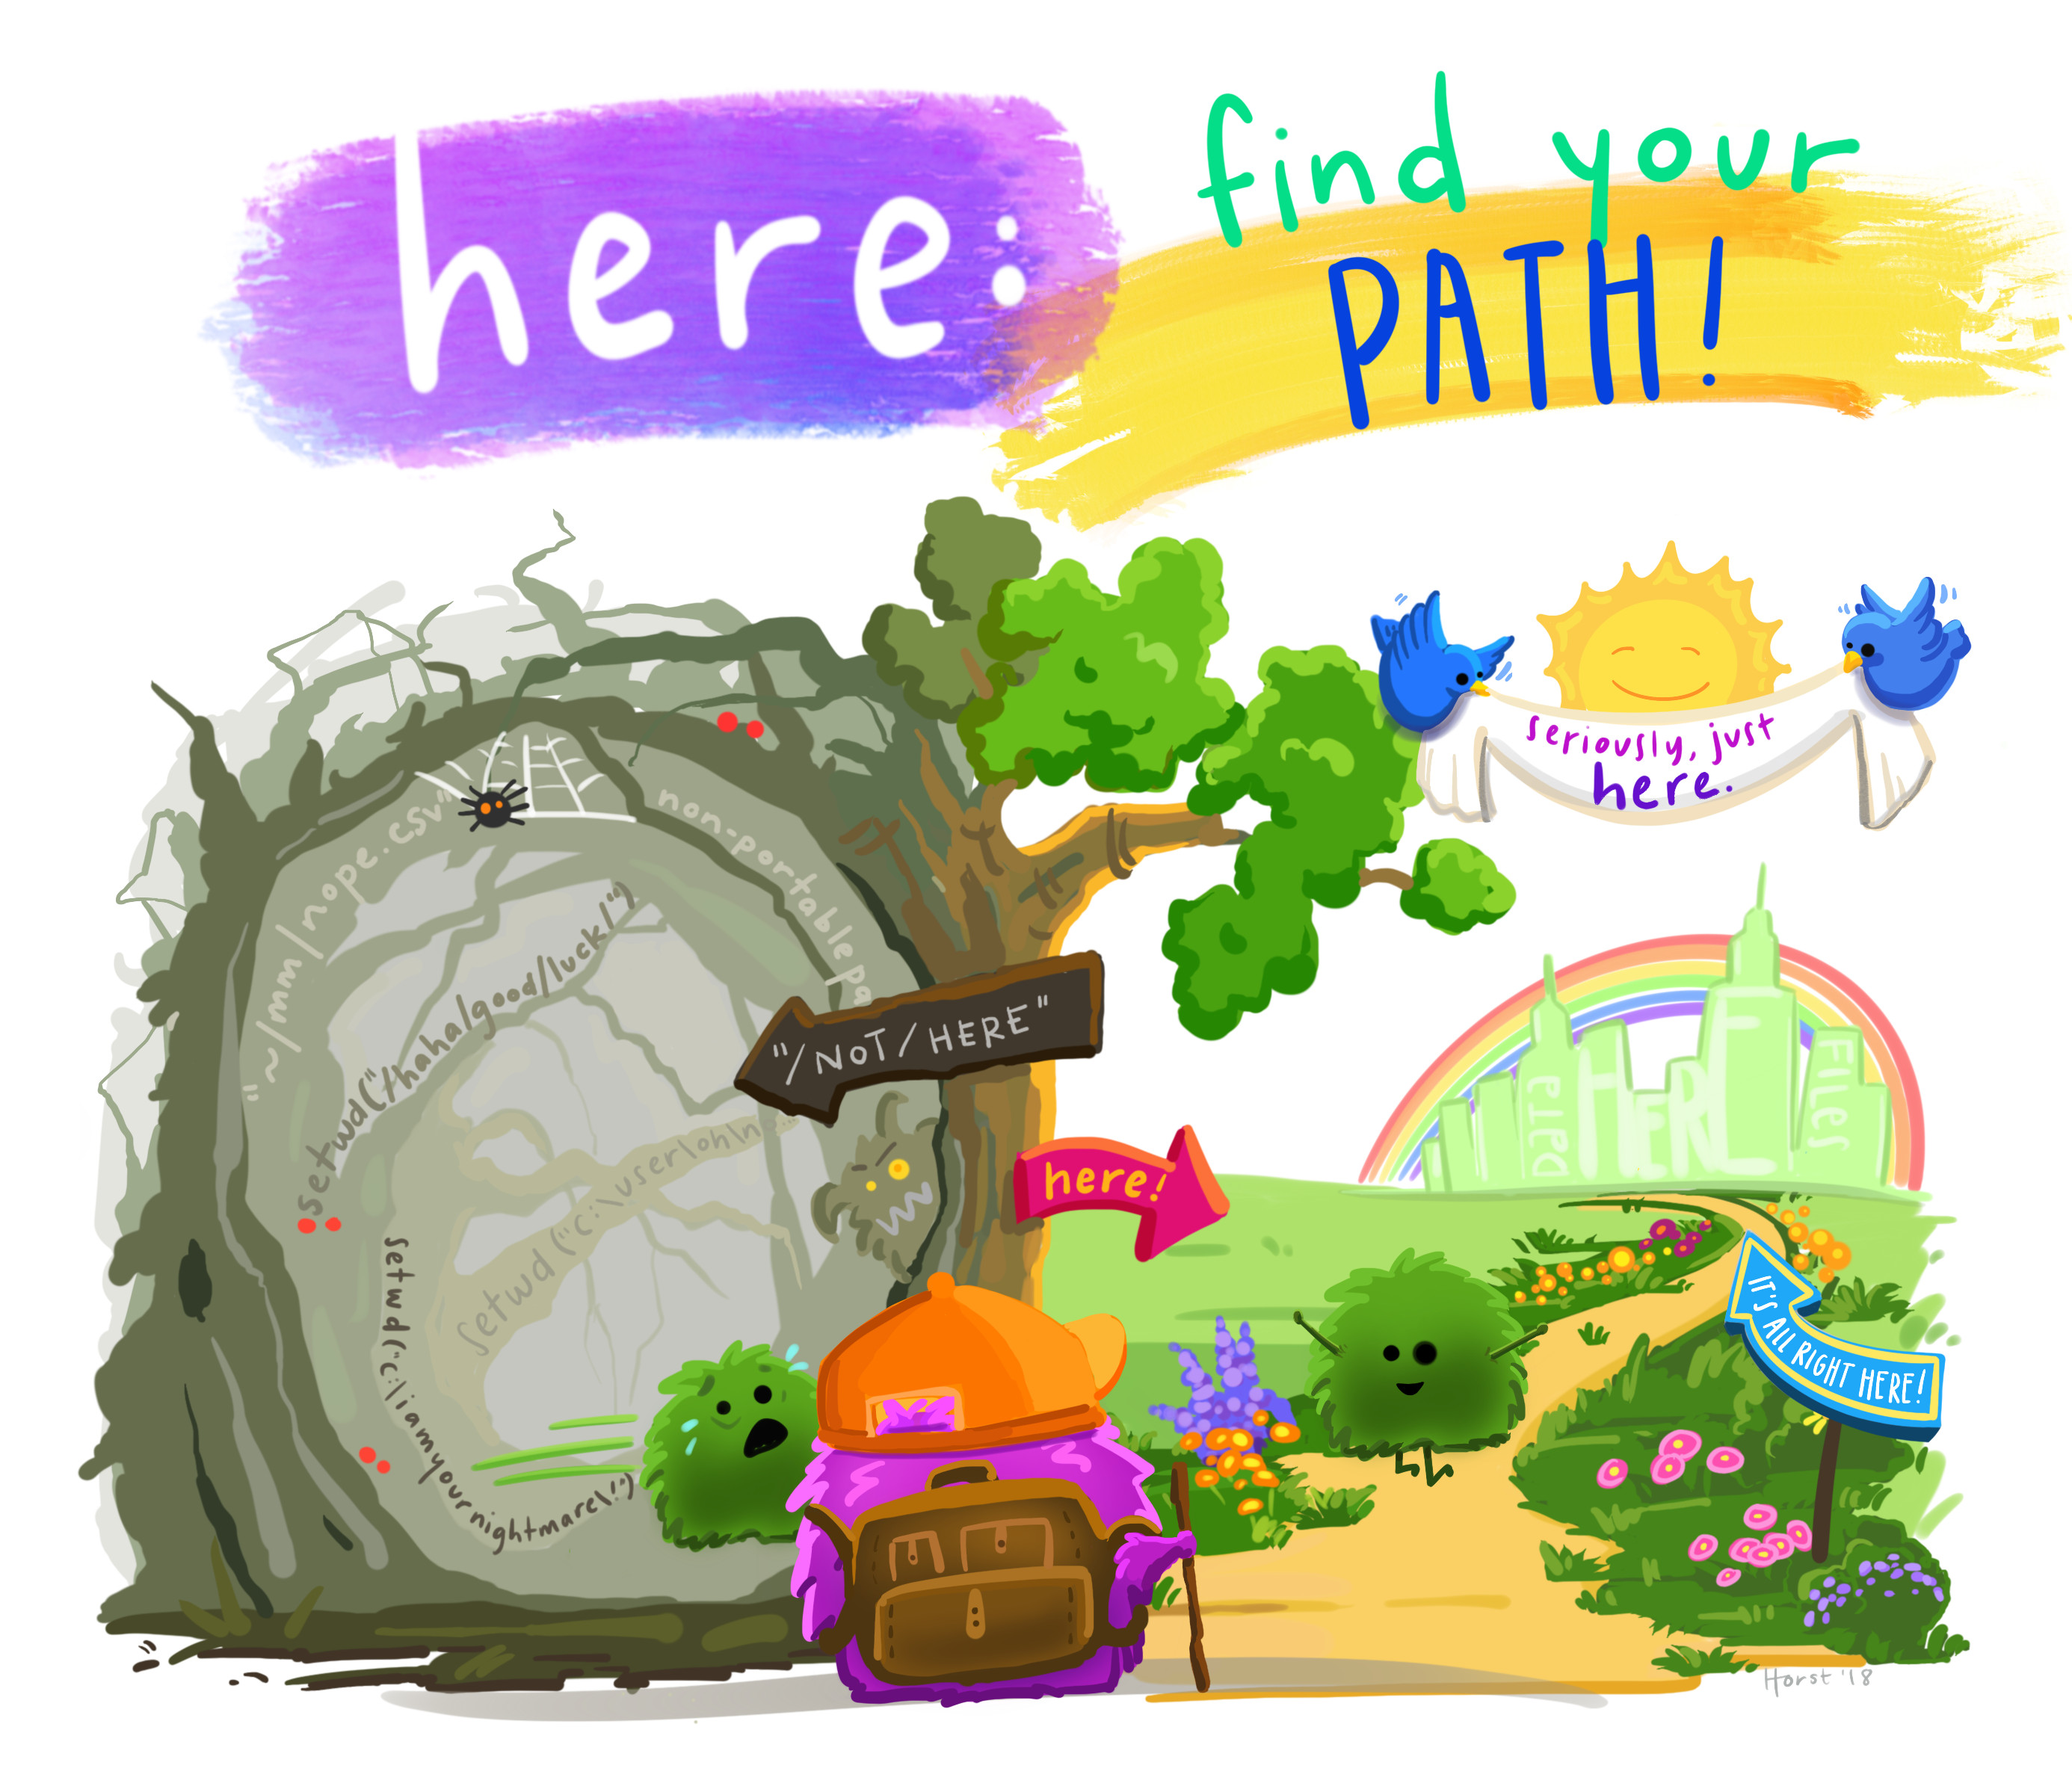 A cartoon showing two paths side-by-side. On the left is a scary spooky forest, with spiderwebs and gnarled trees, with file paths written on the branches like “~/mmm/nope.csv” and “setwd(“/haha/good/luck/”), with a scared looking cute fuzzy monster running out of it. On the right is a bright, colorful path with flowers, rainbow and sunshine, with signs saying “here!” and “it’s all right here!” A monster facing away from us in a backpack and walking stick is looking toward the right path. Stylized text reads “here: find your path.”